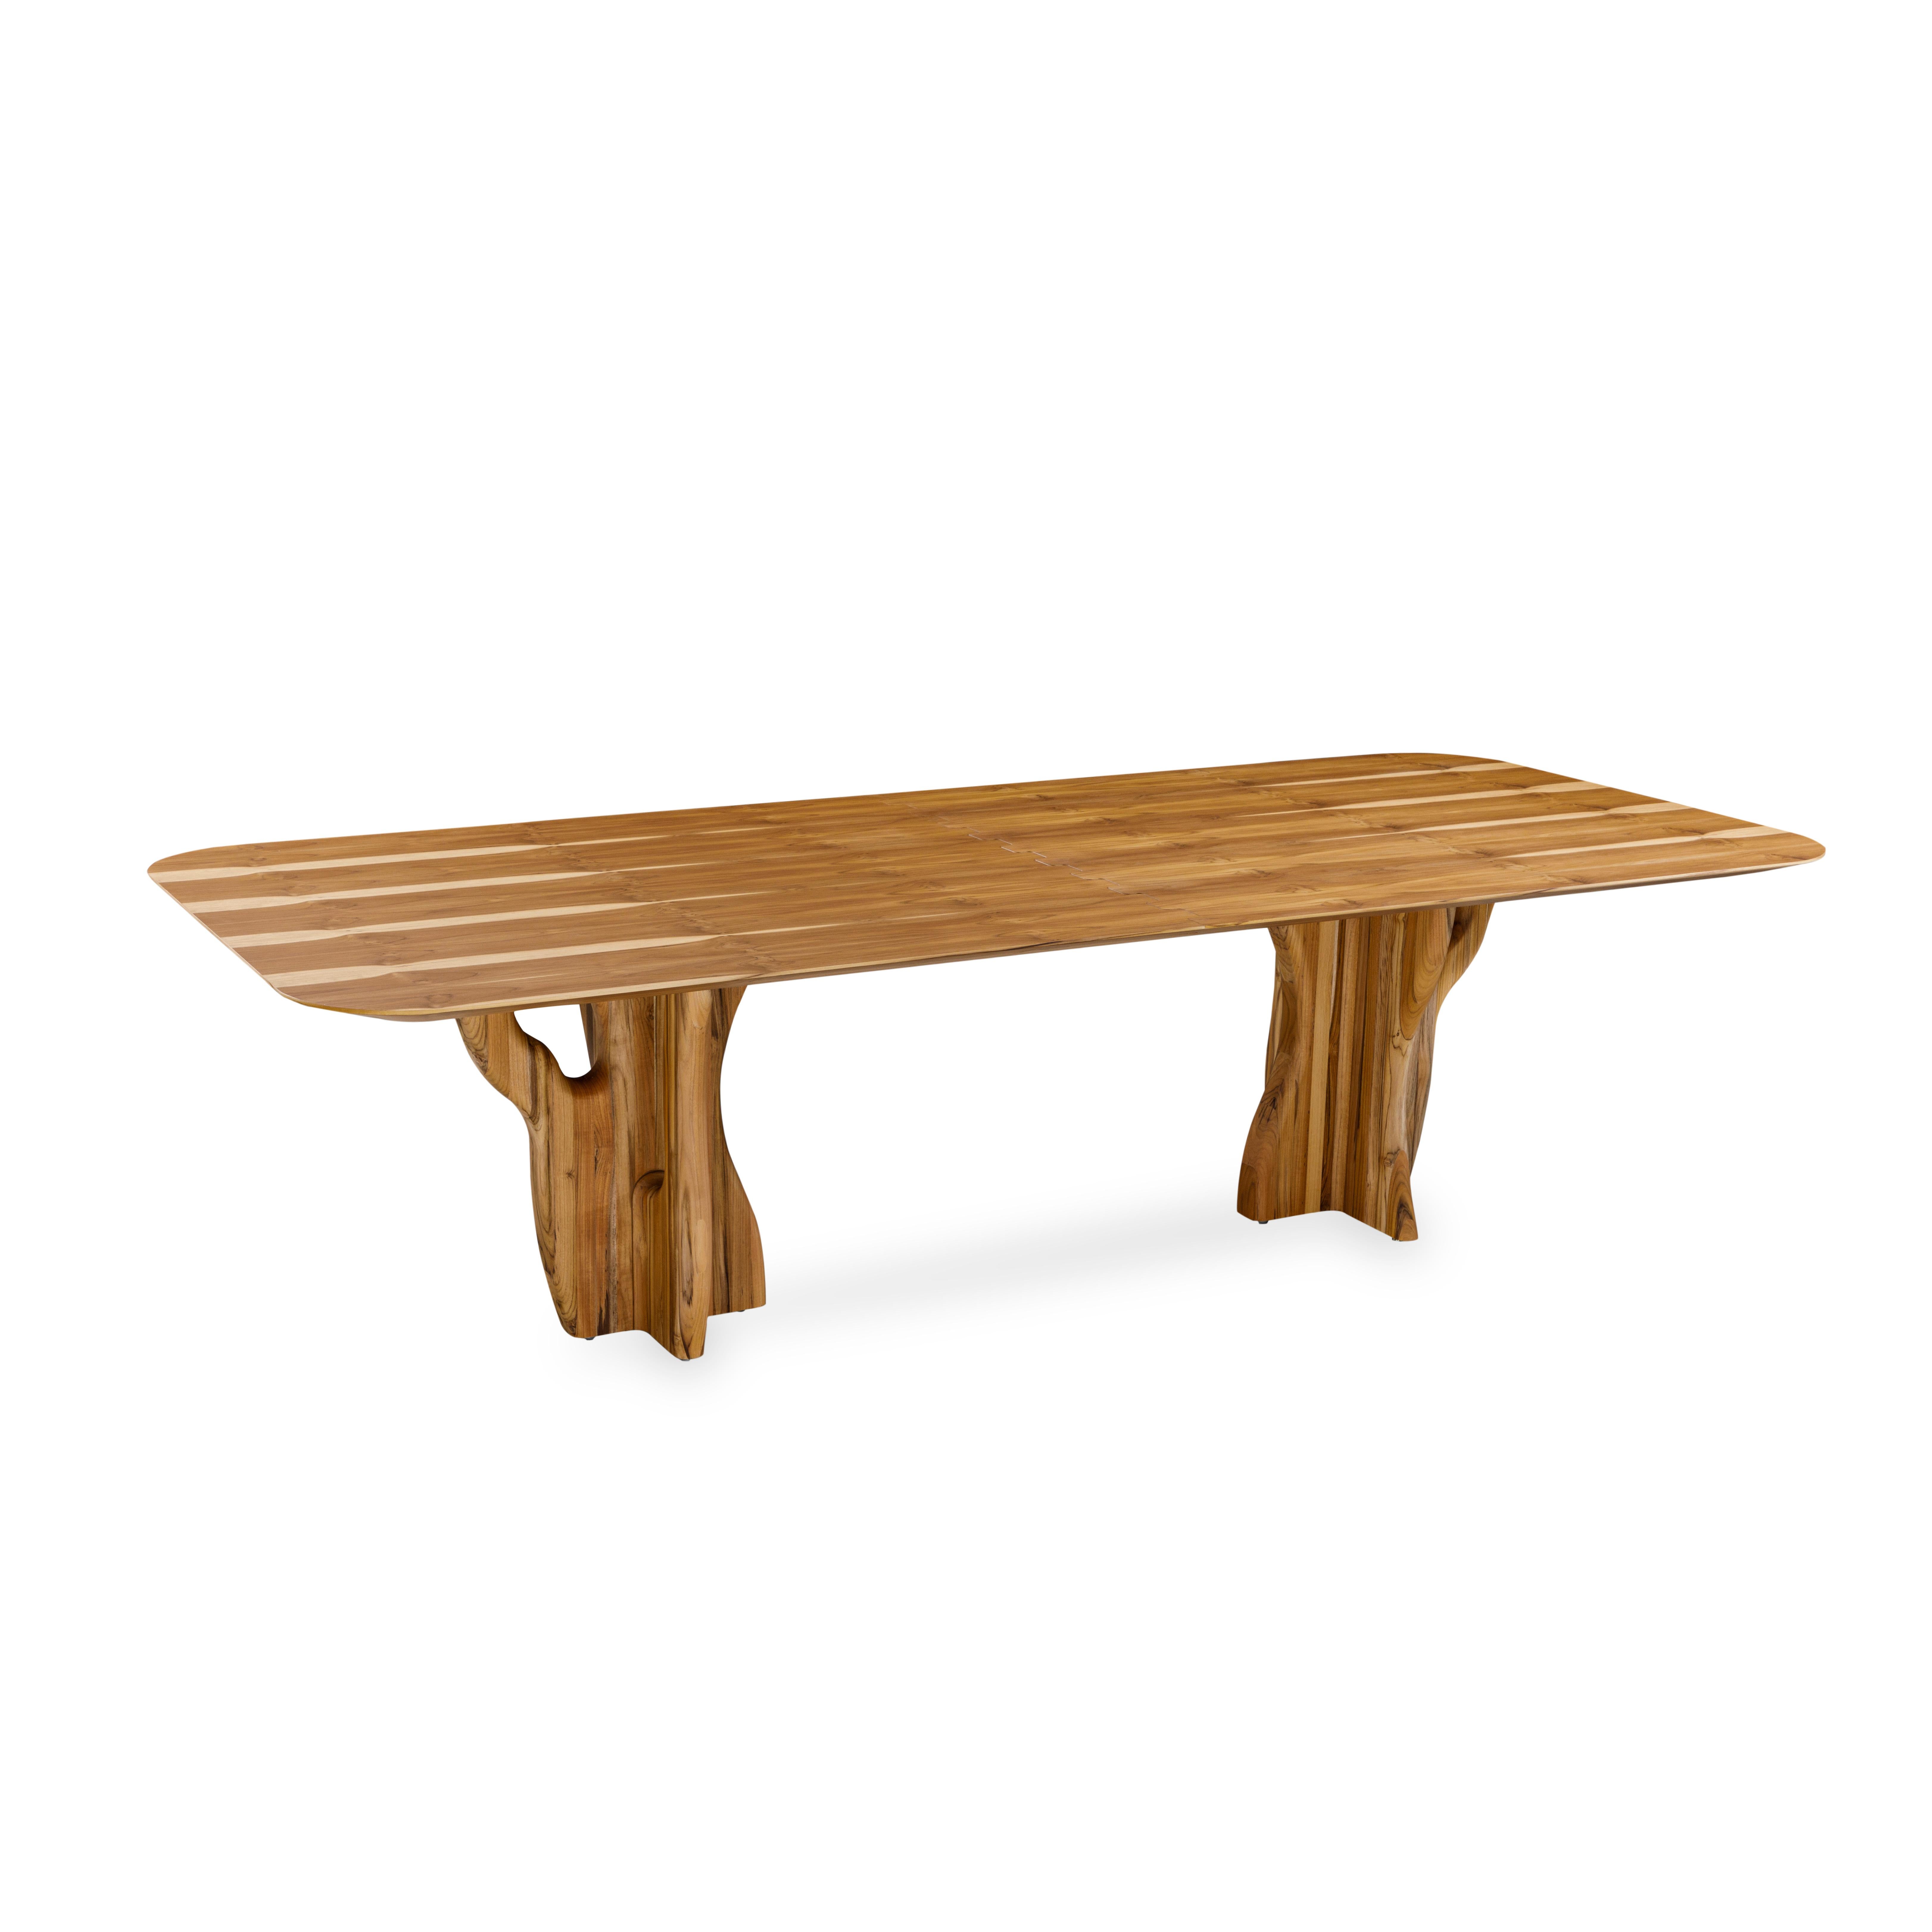 Uultis design team has manufactured the Suma dining table in a teak veneered finish top with organic solid wood legs, perfect for your dreamed dining space. This is a piece that is designed to be used during meals and gatherings, and it is also